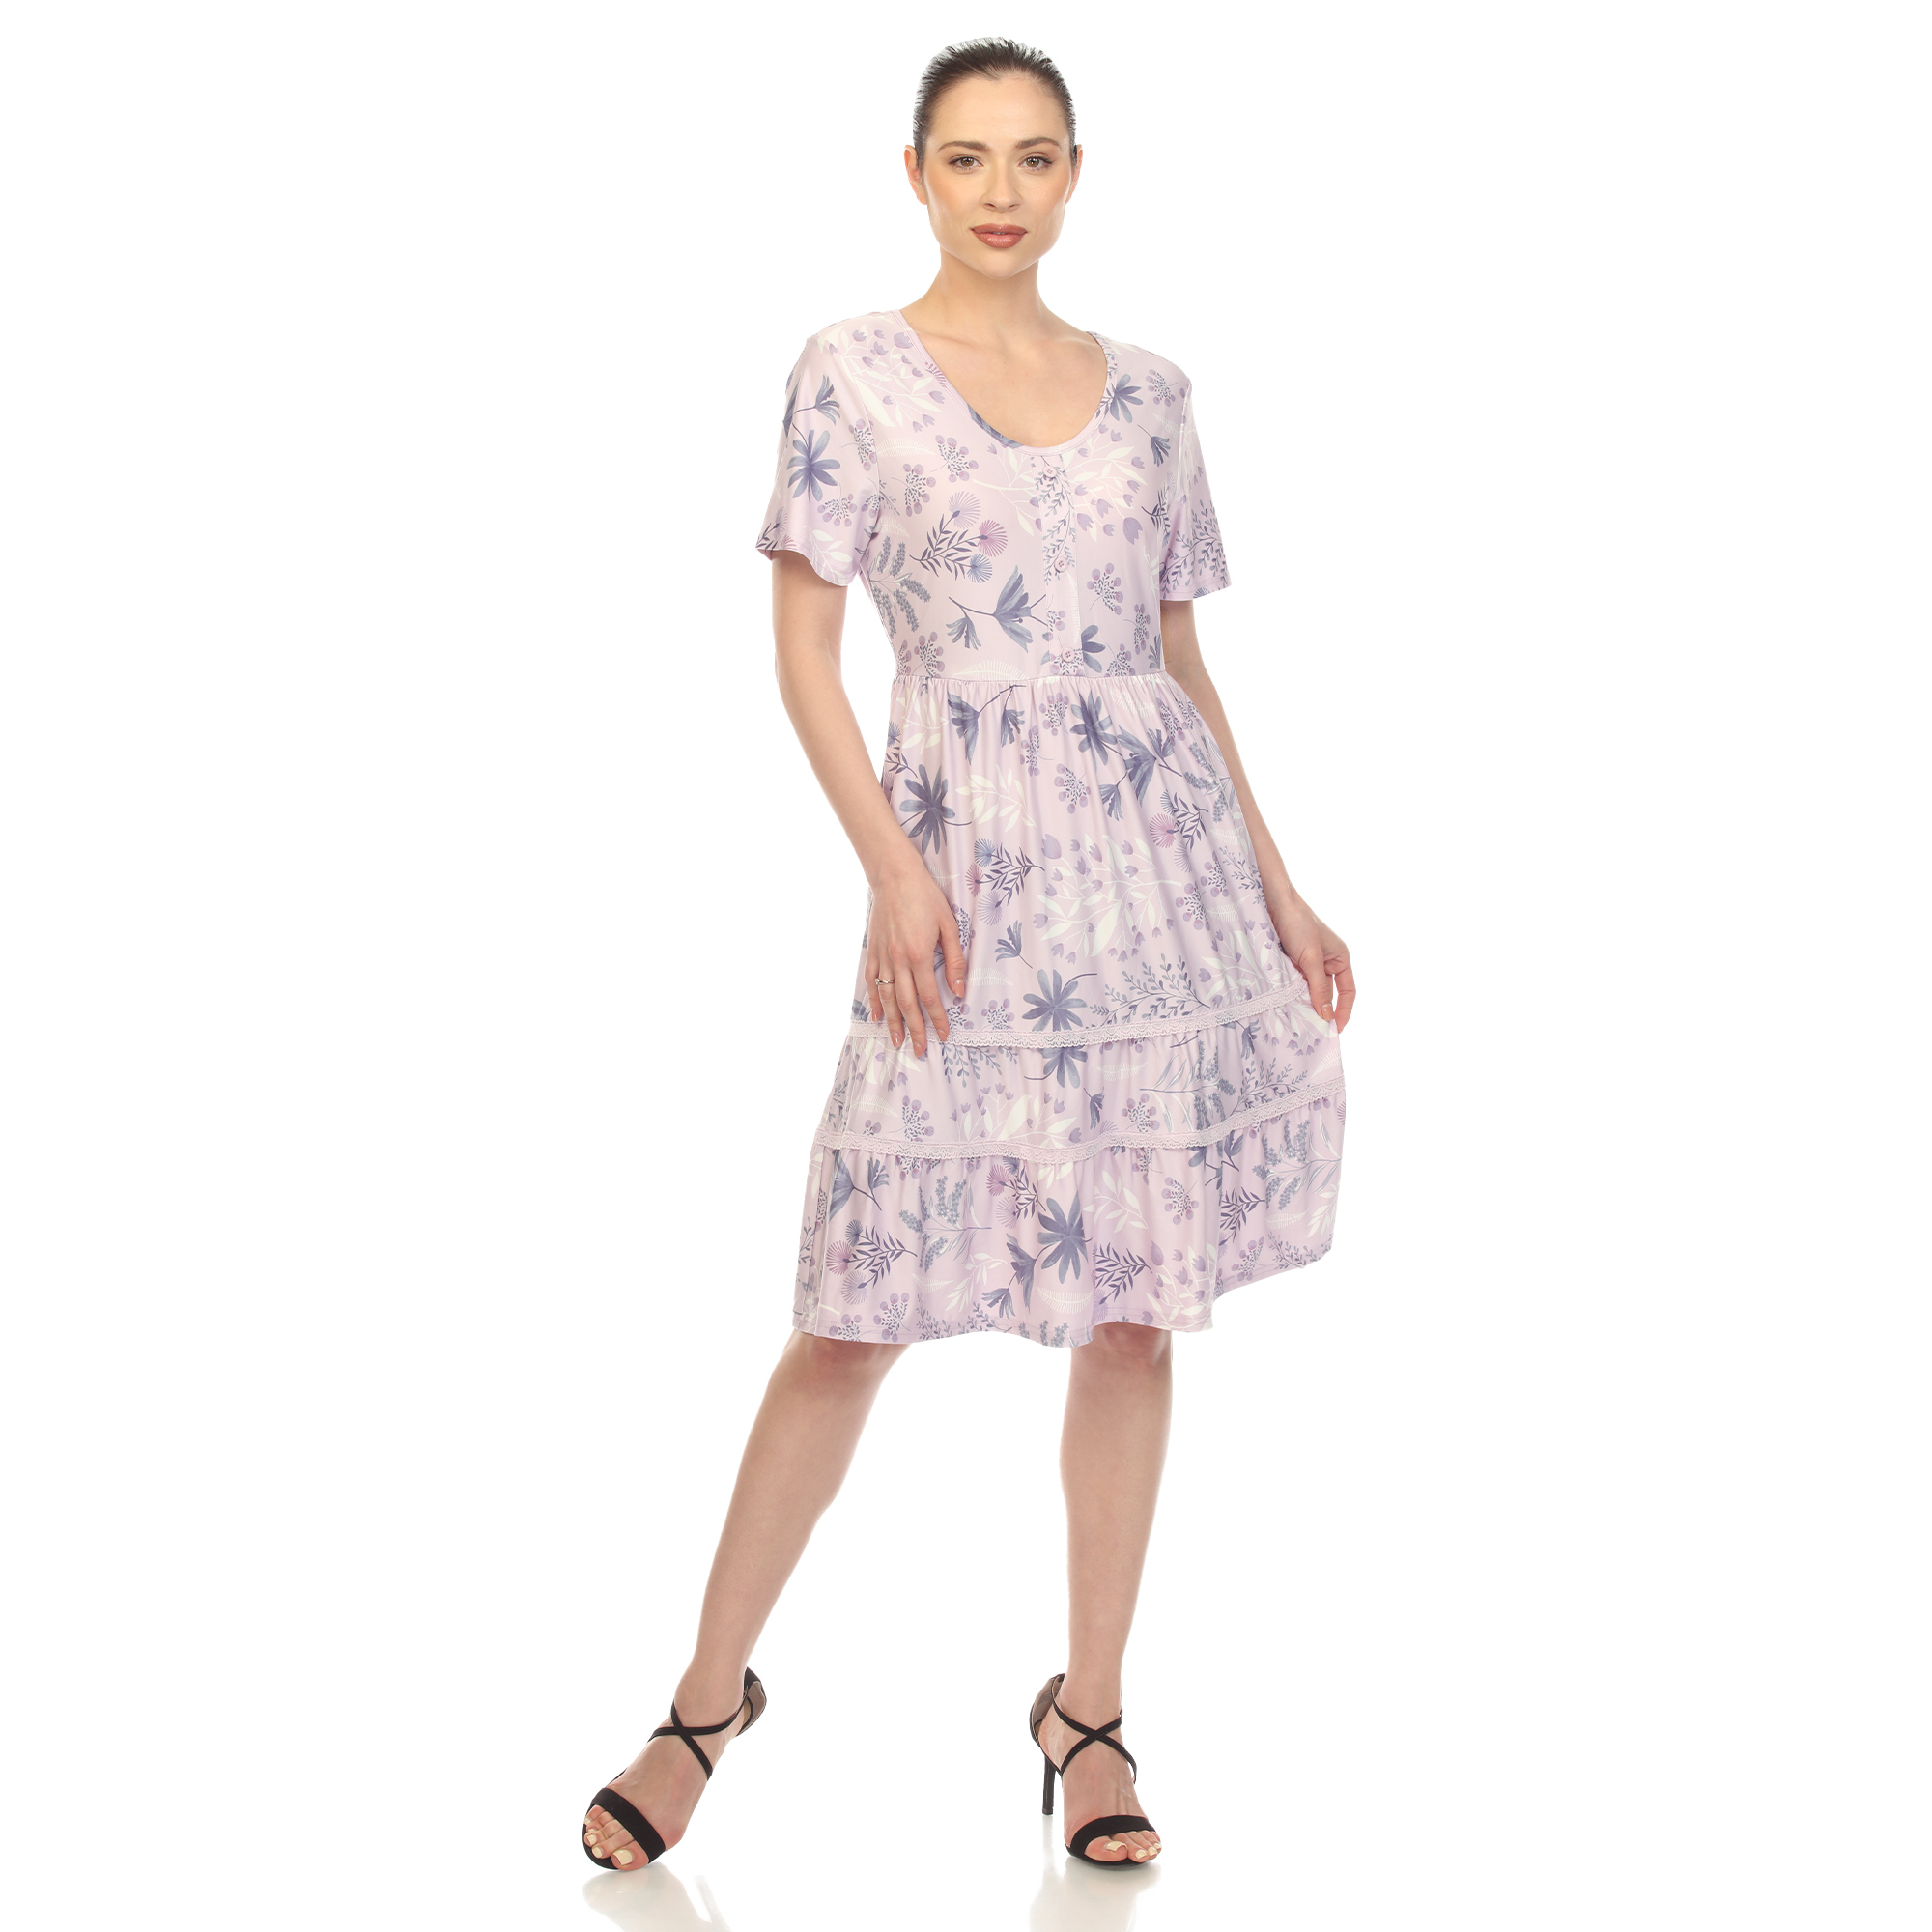 White Mark Women's Floral Short Sleeve Knee Length Tiered Dress - Lavender, X-Large